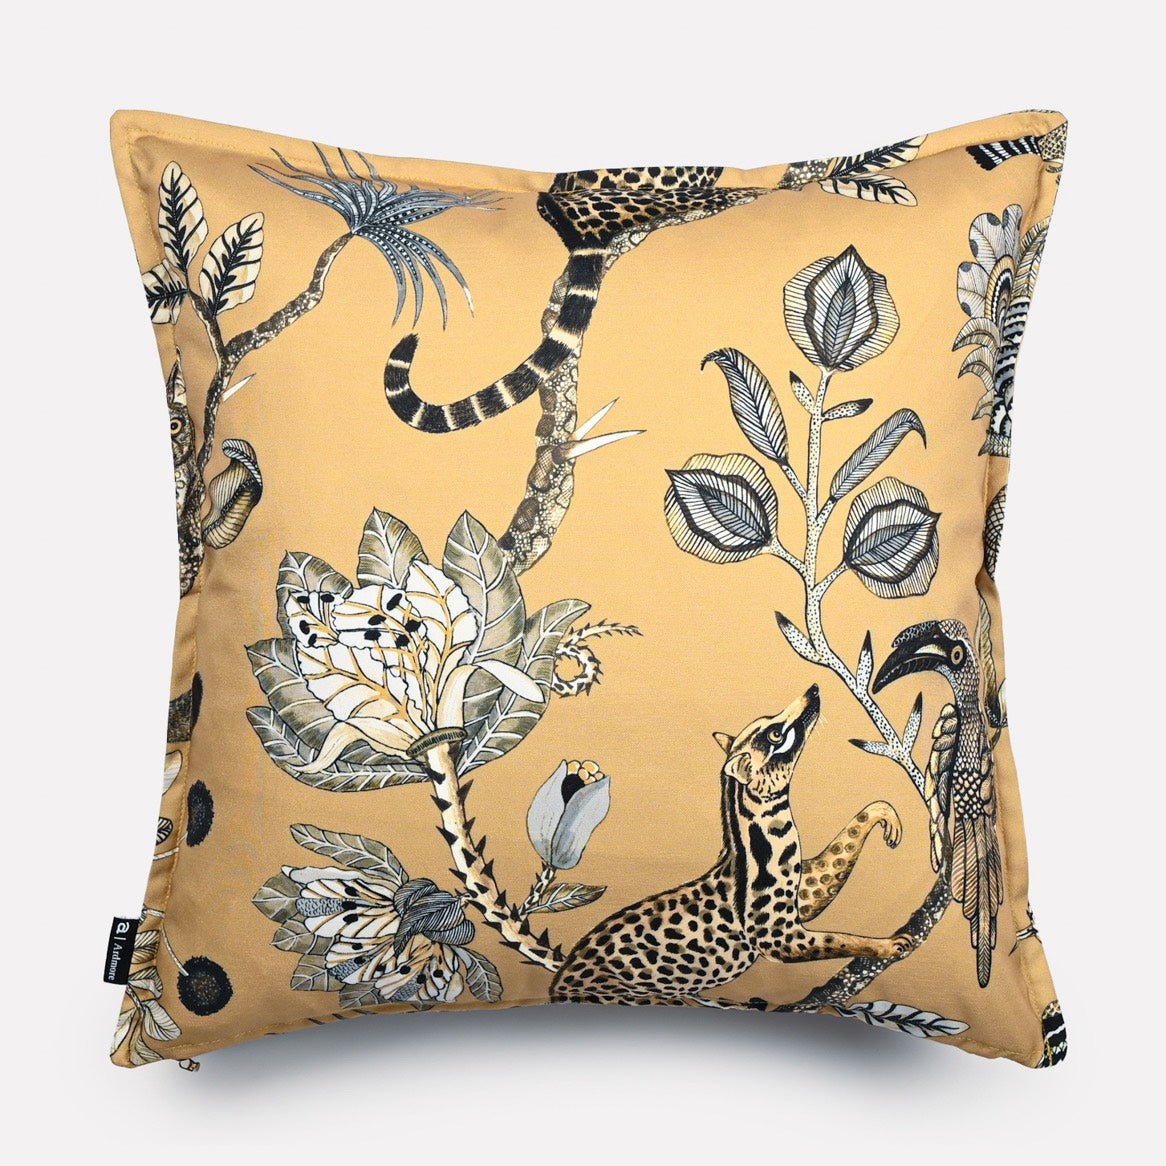 Camp Critters Gold Outdoor Cushion Cover